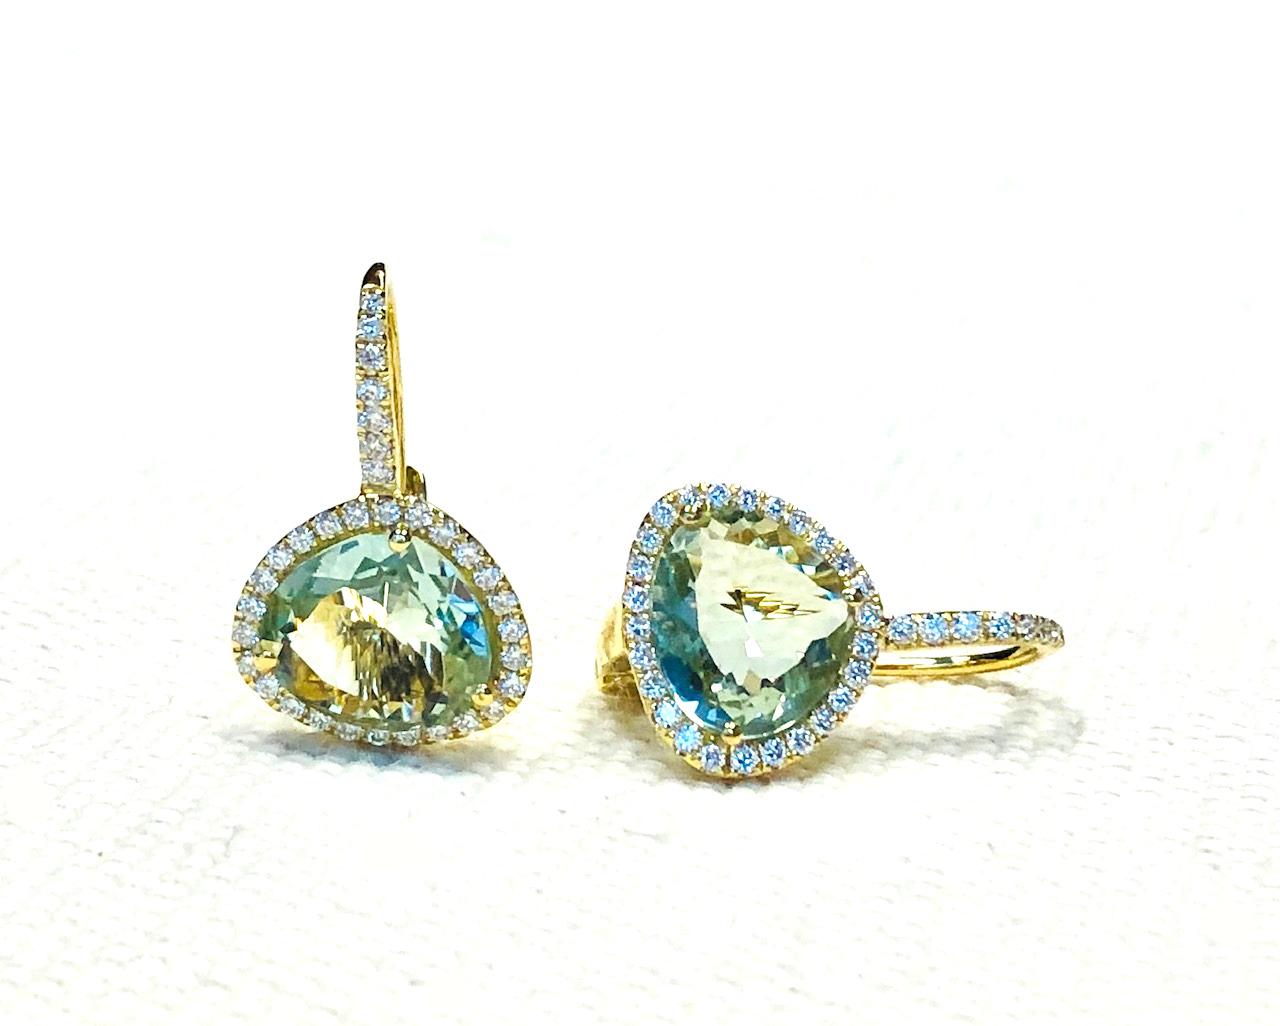 These stylish drop earrings feature crystal clear blue topaz 